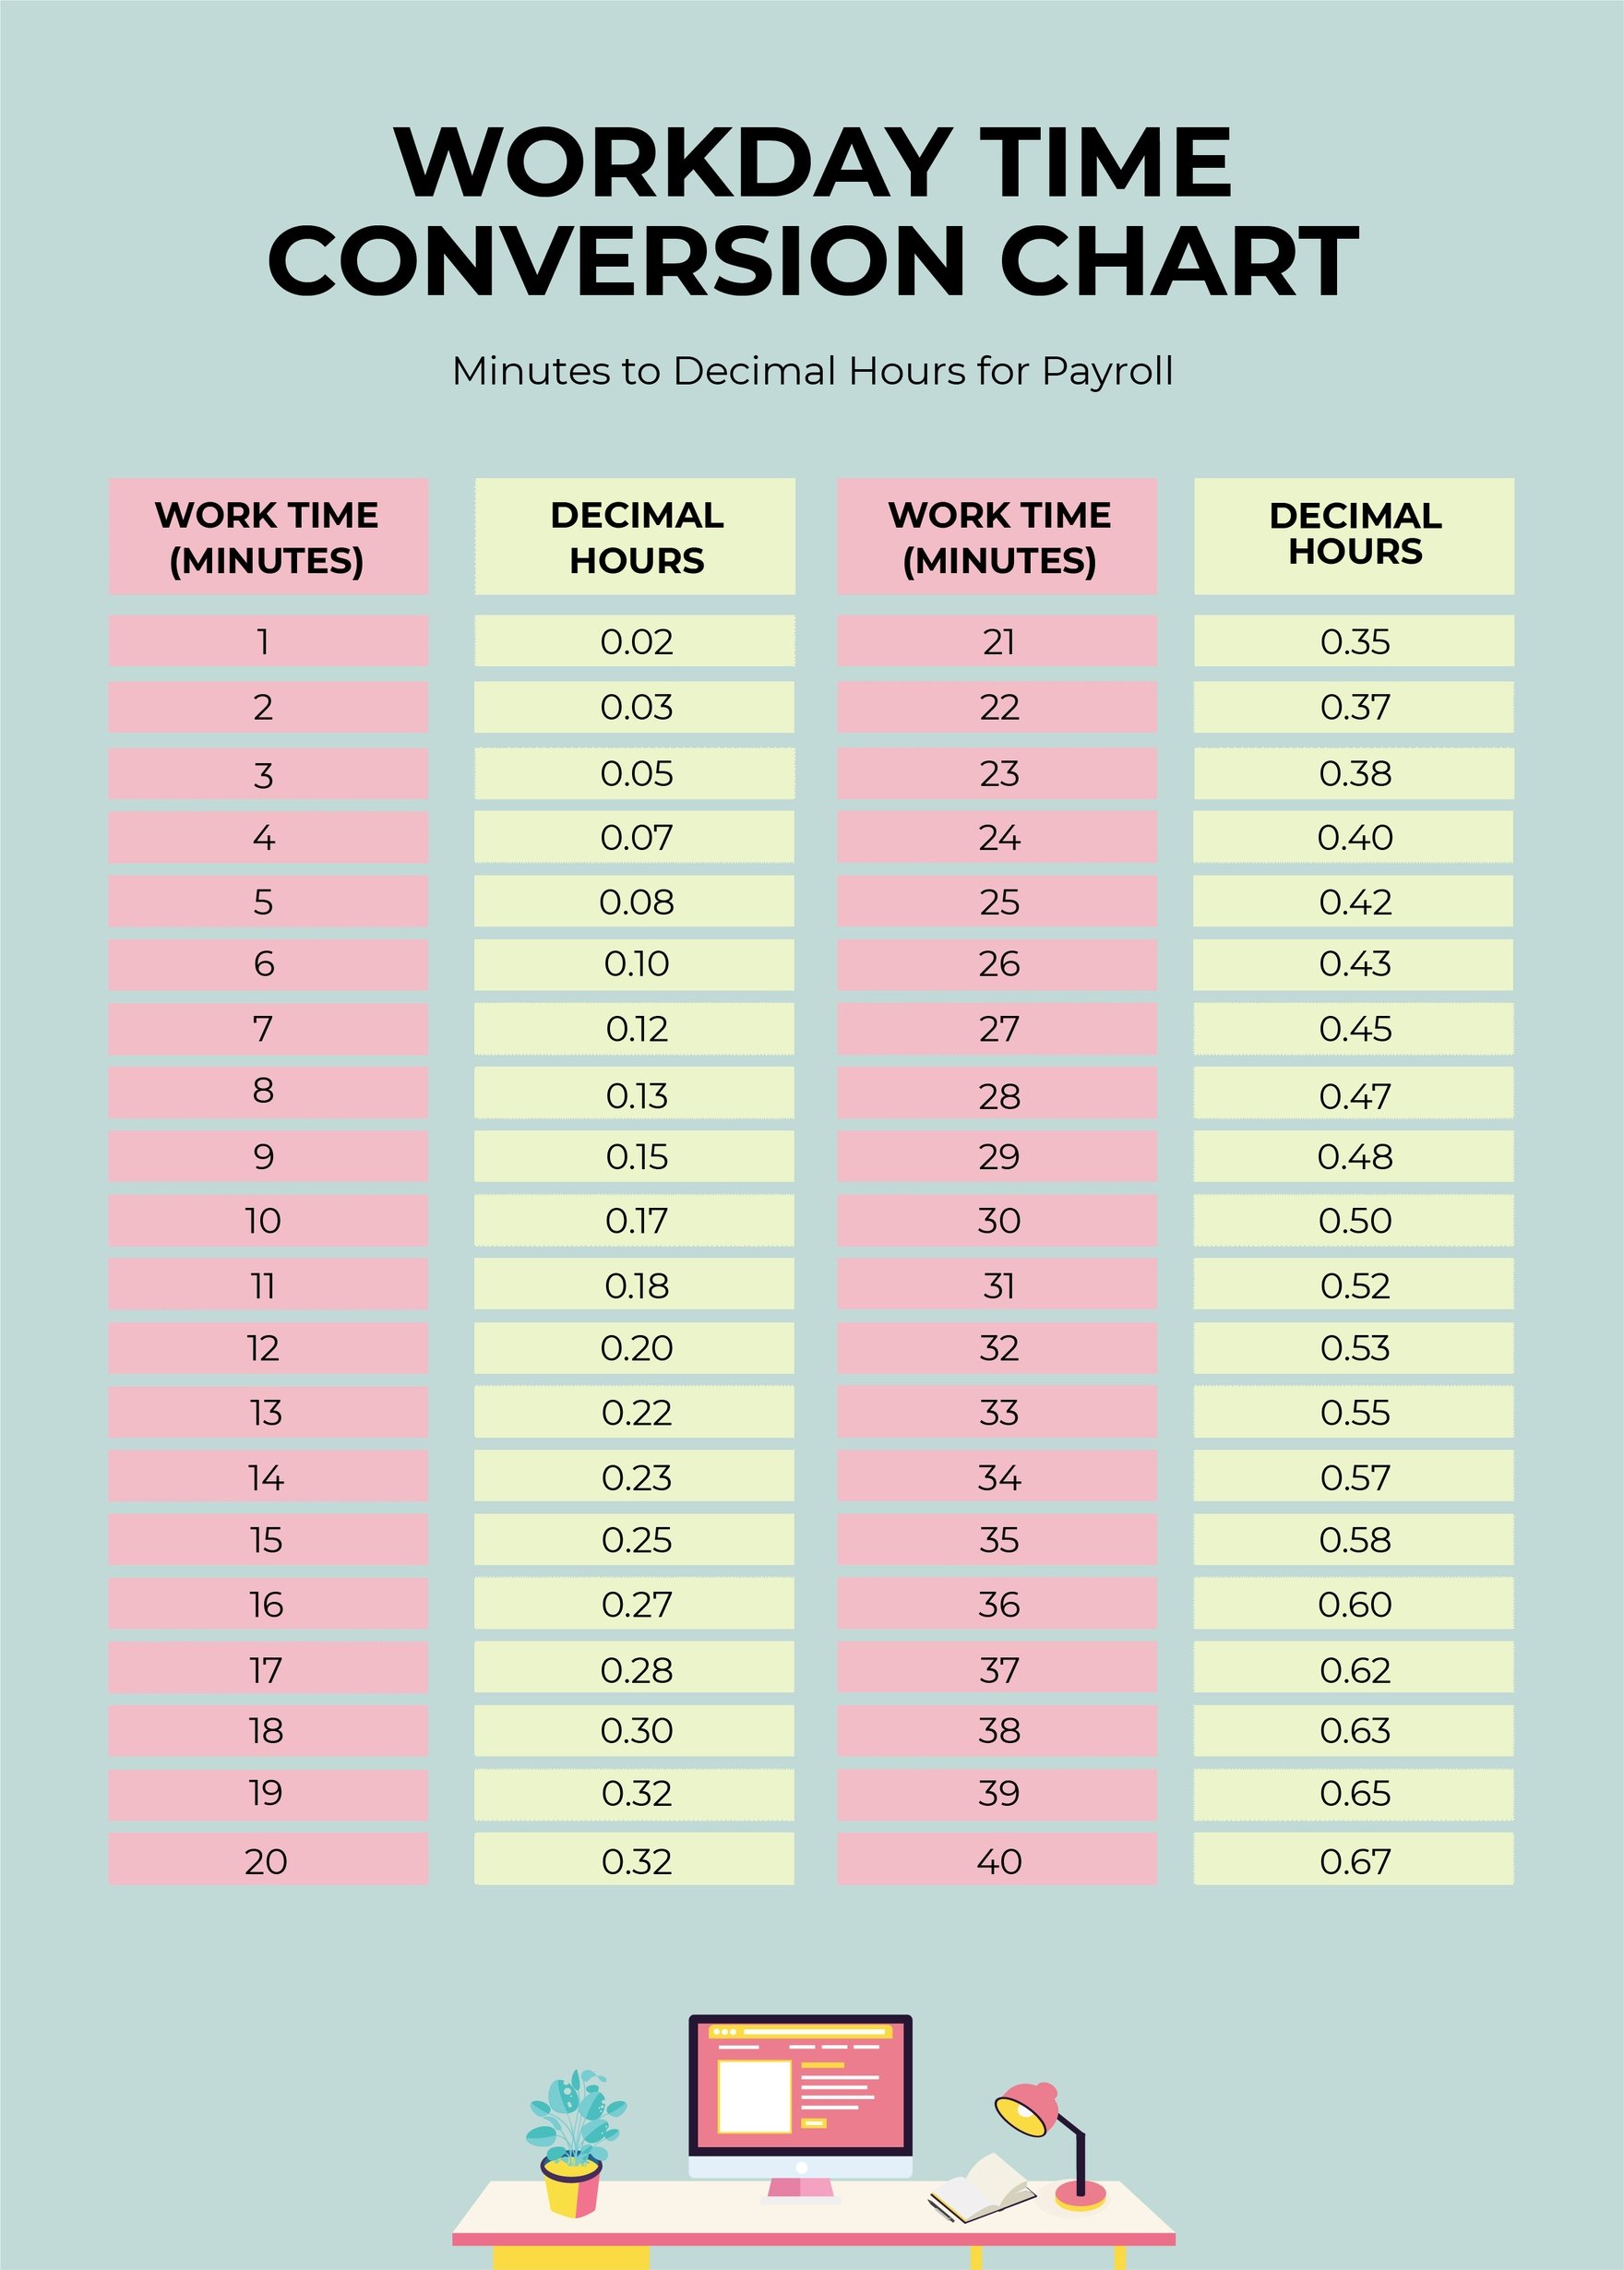 Workday Time Conversion Chart